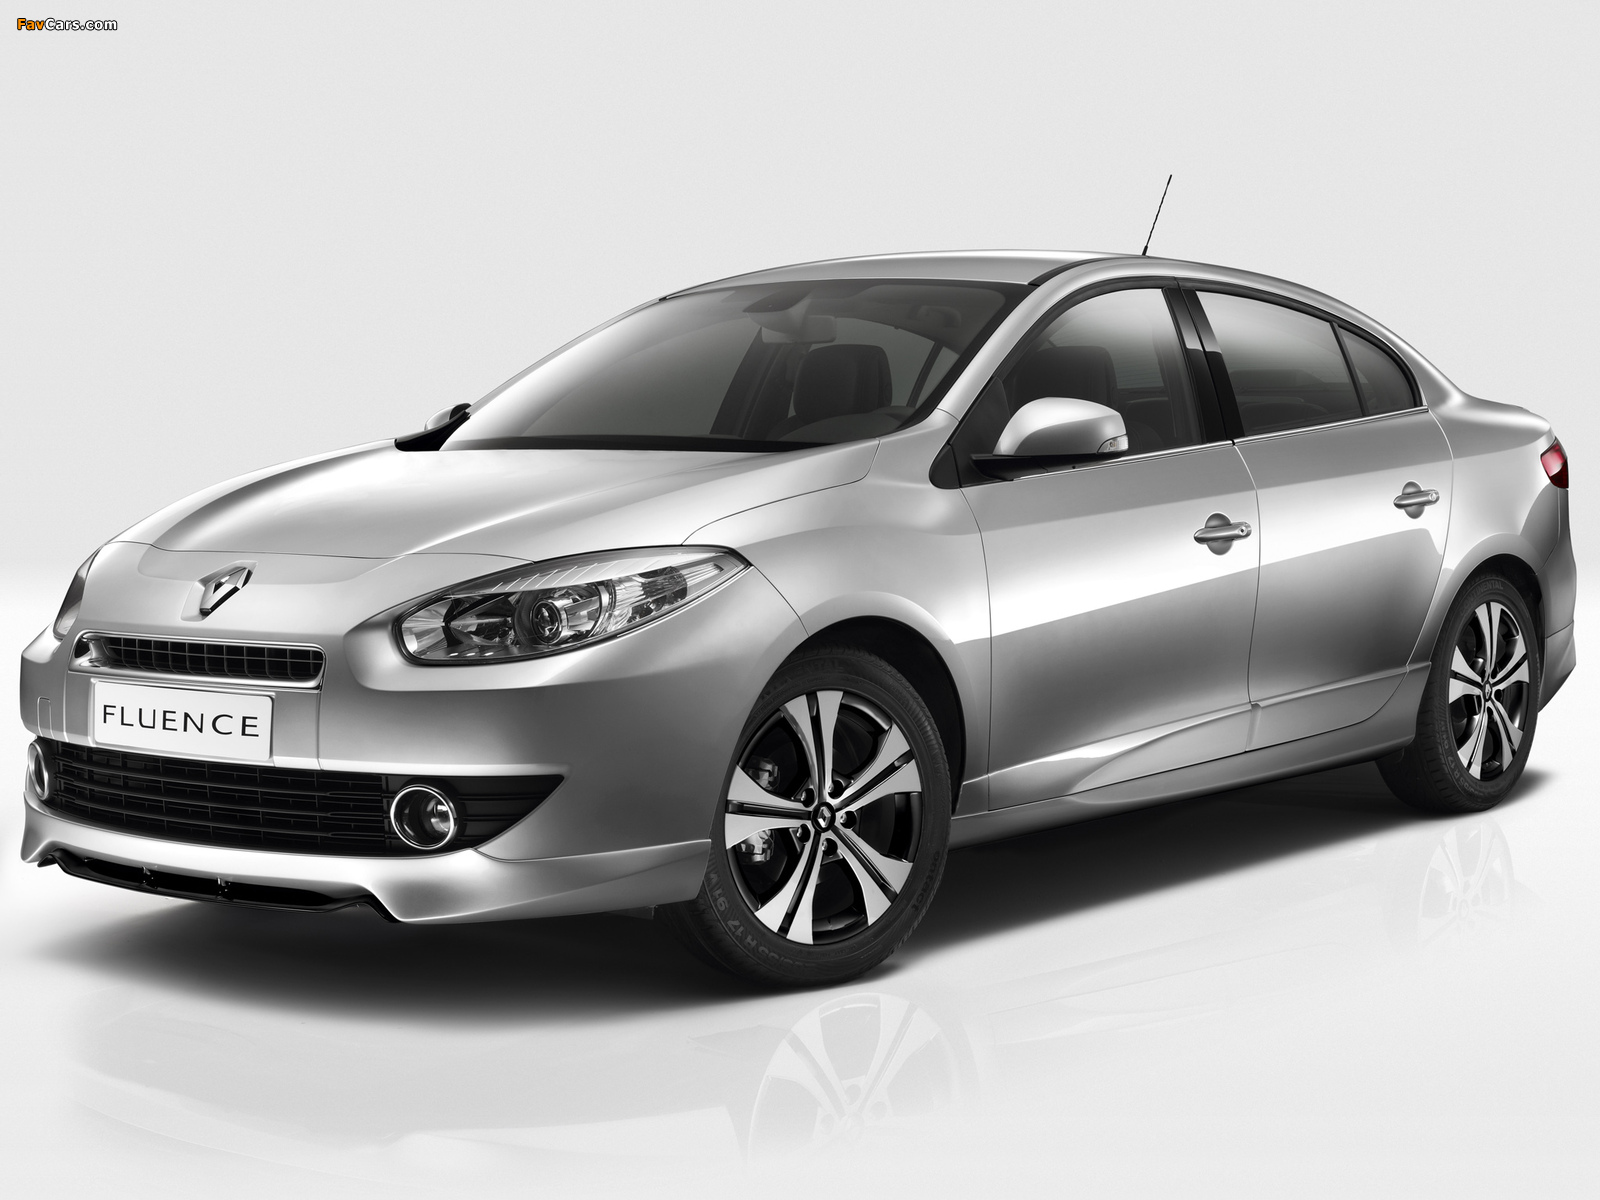 Renault Fluence Black Edition 2012 pictures (1600 x 1200)